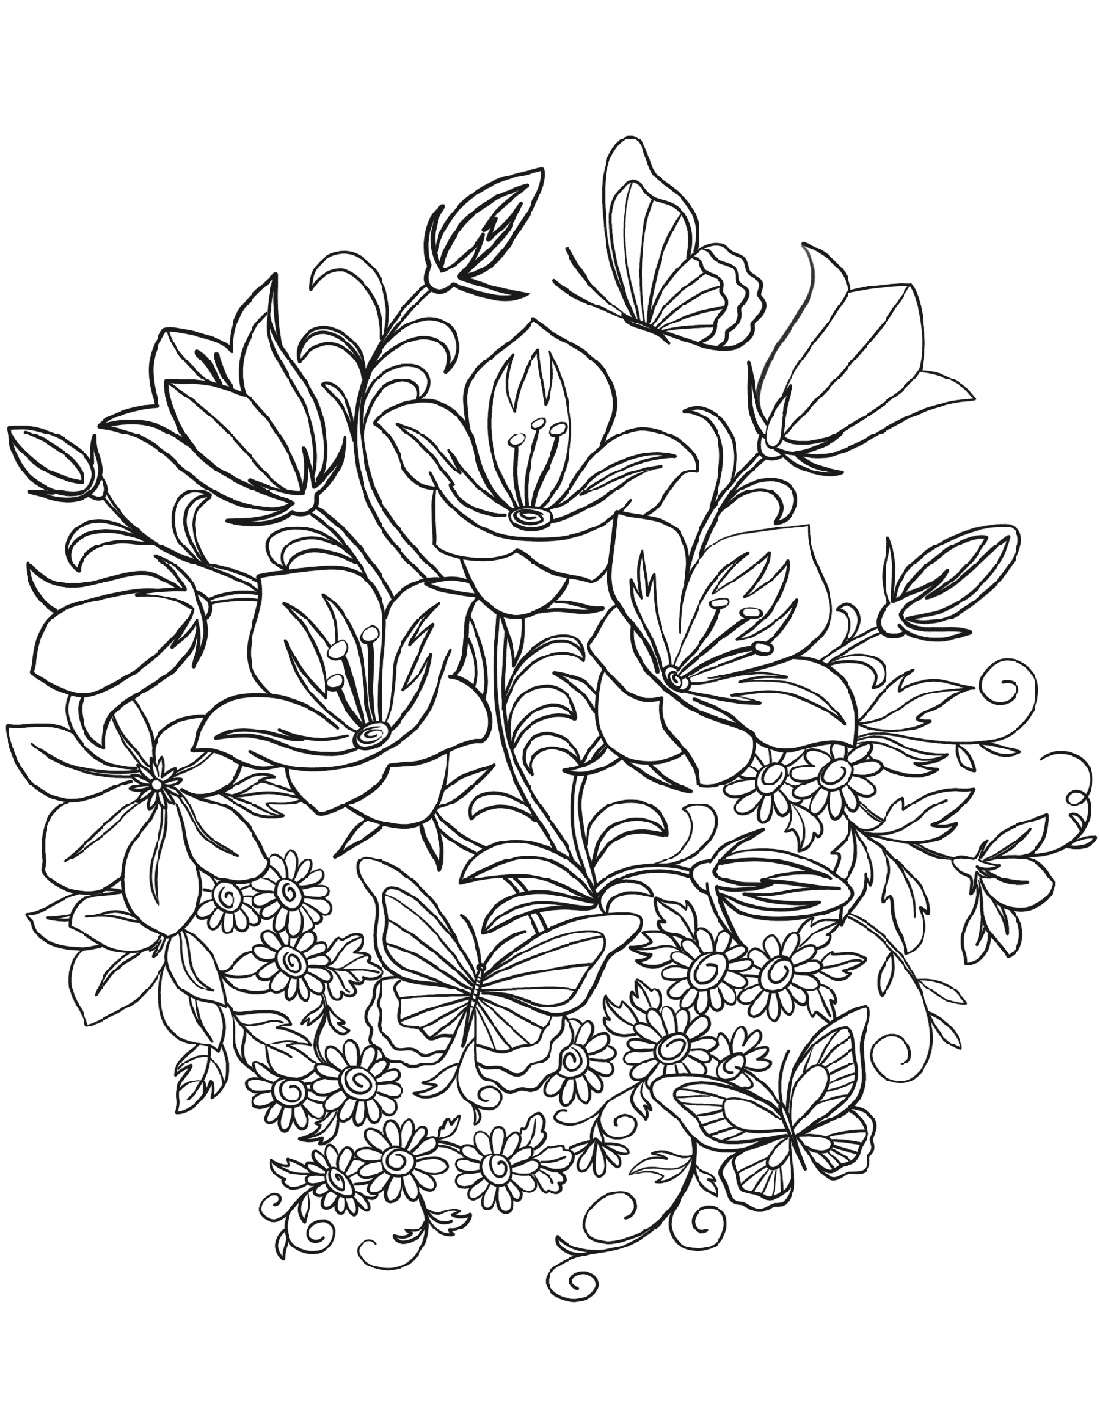 Coloring Pages Of Flowers And Butterflies To Print